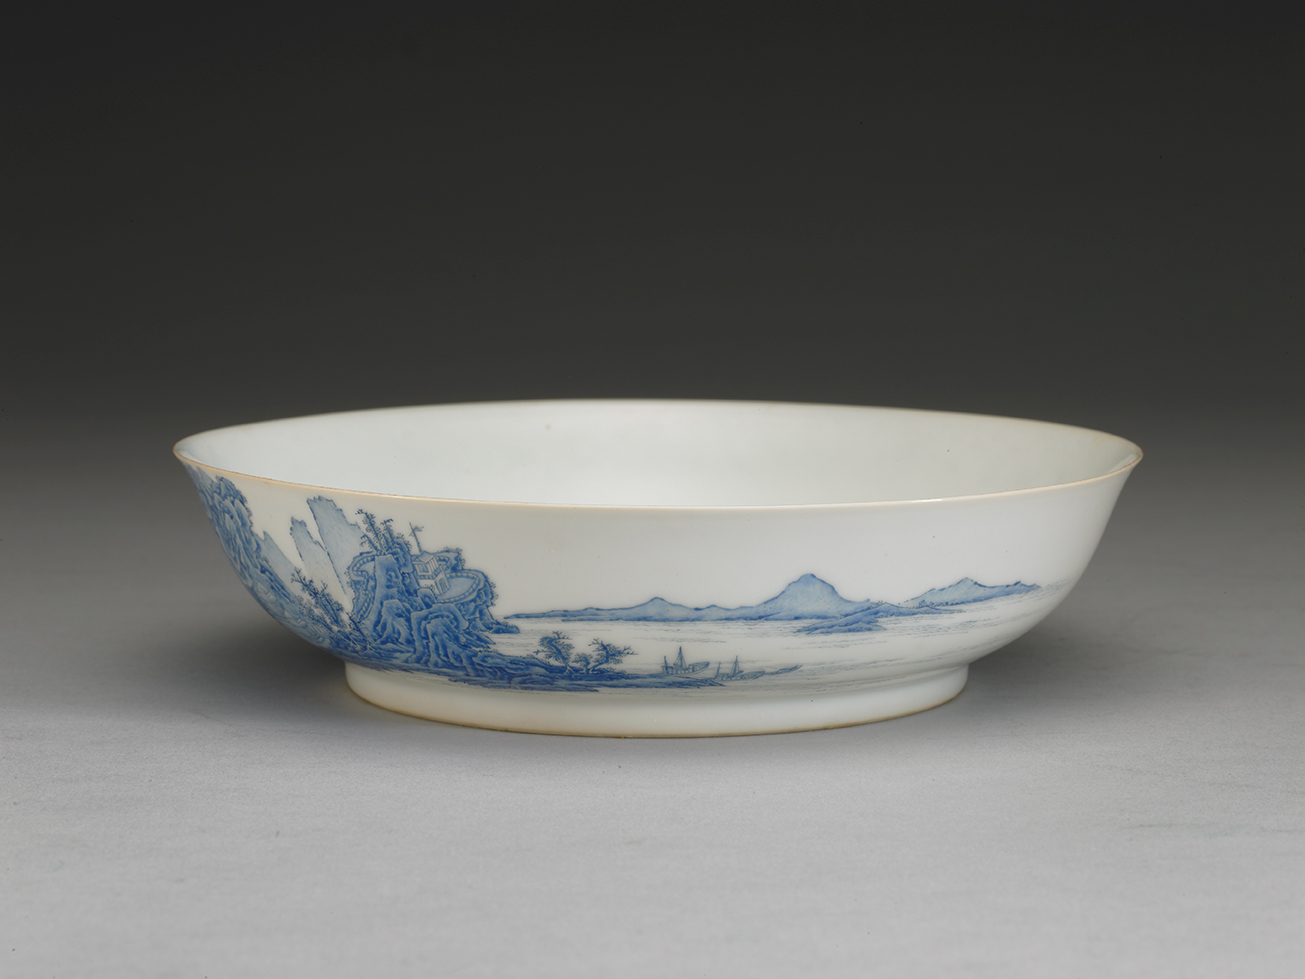 Dish with blue landscape in falangcai painted enamels